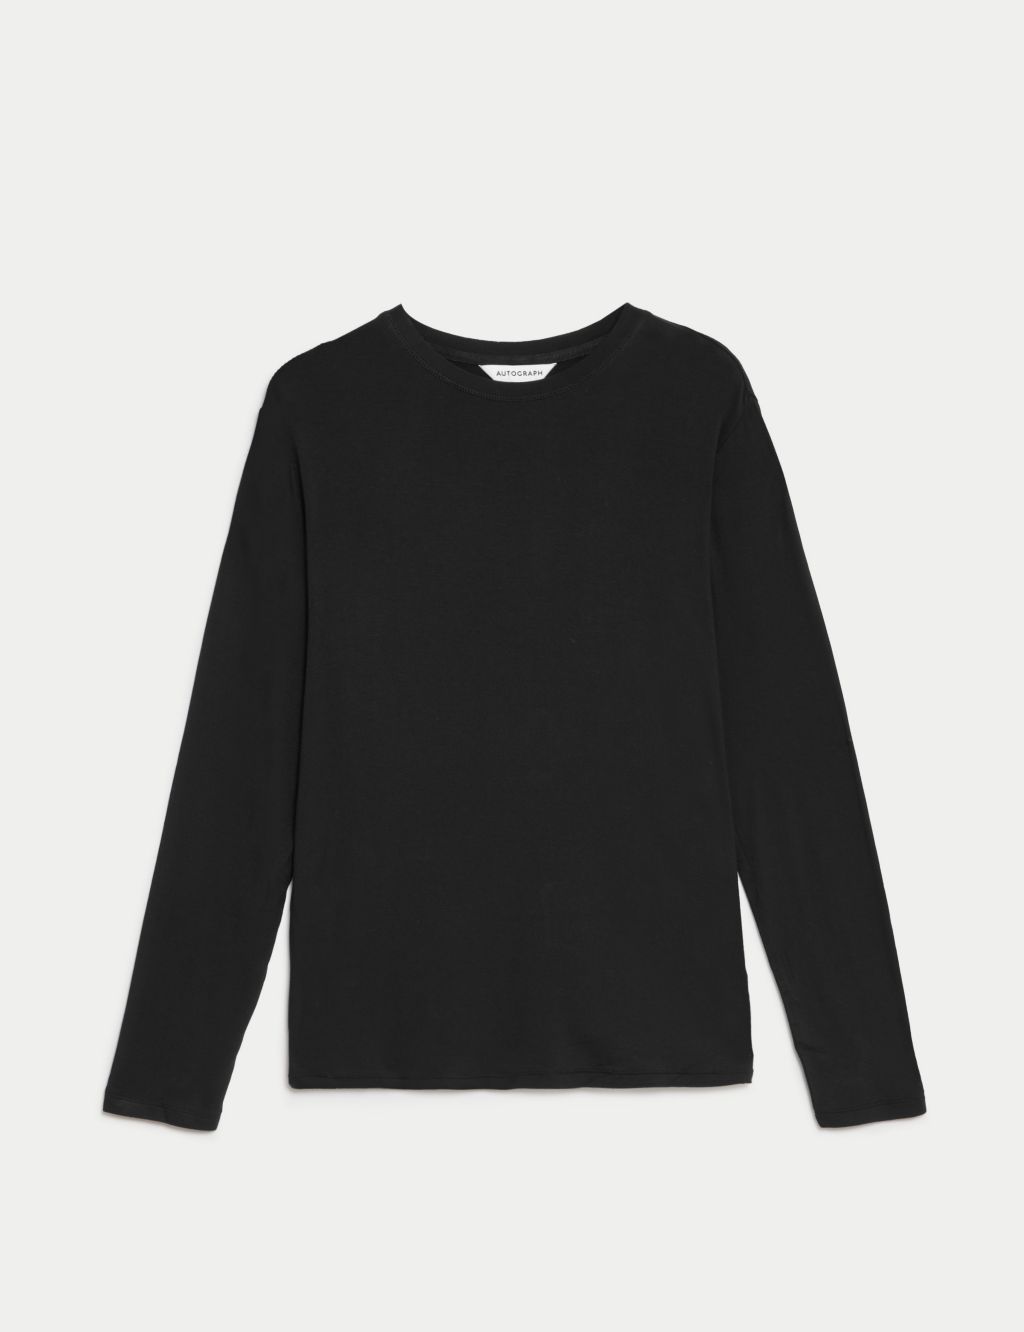 Round Neck Long Sleeve Top image 2